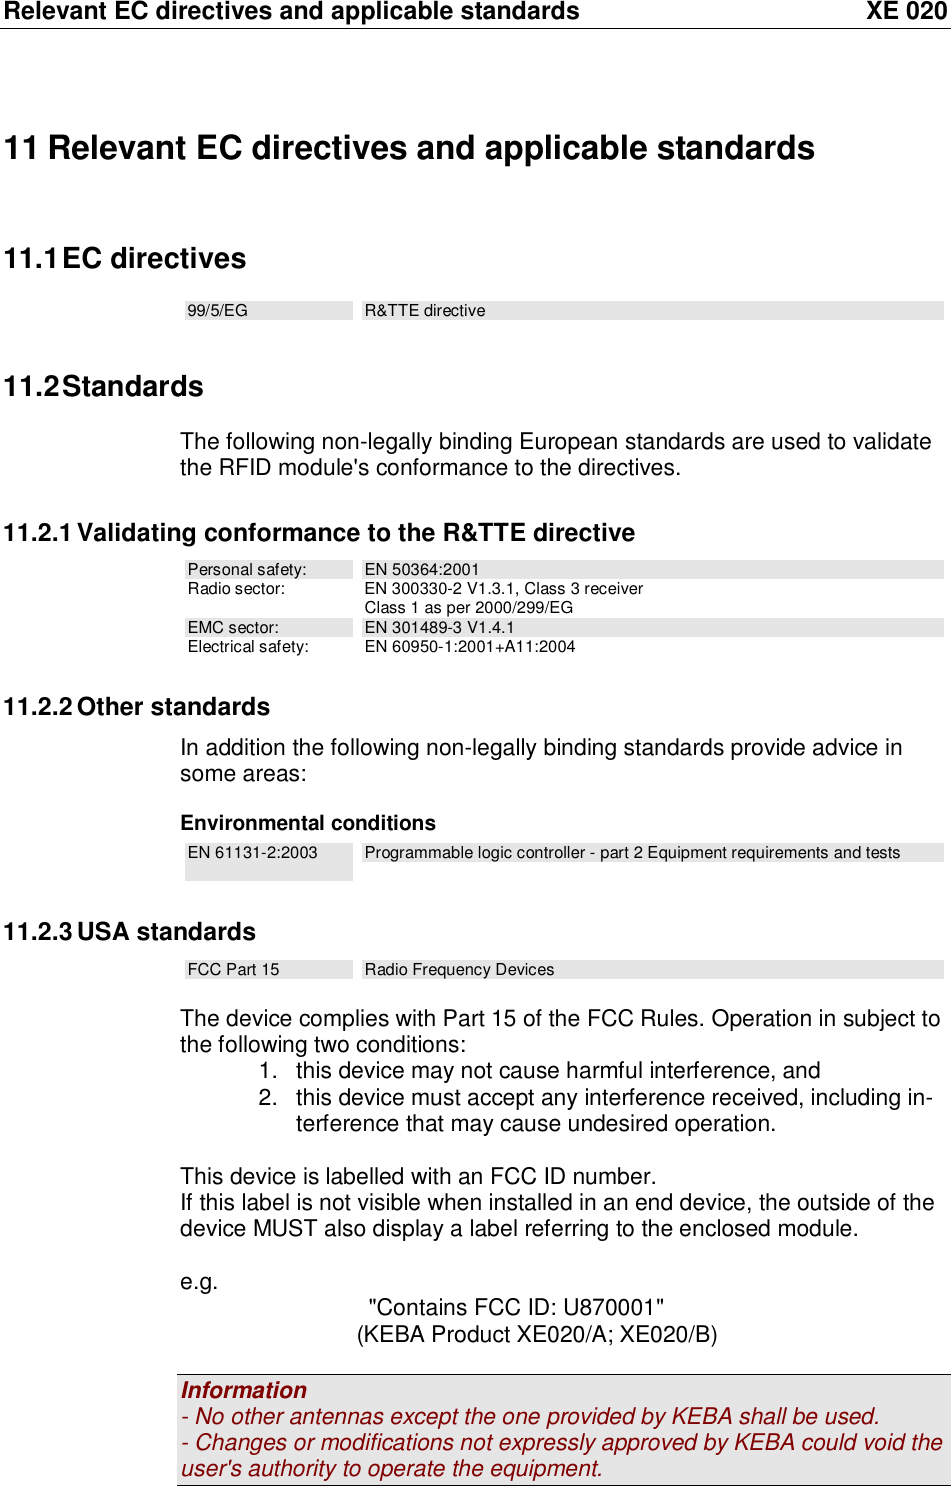 Relevant EC directives and applicable standards XE 020 11 Relevant EC directives and applicable standards 11.1 EC directives 99/5/EG  R&amp;TTE directive 11.2 Standards The following non-legally binding European standards are used to validate the RFID module&apos;s conformance to the directives. 11.2.1 Validating conformance to the R&amp;TTE directive Personal safety:  EN 50364:2001 Radio sector: EN 300330-2 V1.3.1, Class 3 receiver  Class 1 as per 2000/299/EG EMC sector:  EN 301489-3 V1.4.1 Electrical safety: EN 60950-1:2001+A11:2004 11.2.2 Other standards In addition the following non-legally binding standards provide advice in some areas:   Environmental conditions EN 61131-2:2003  Programmable logic controller - part 2 Equipment requirements and tests 11.2.3 USA standards FCC Part 15  Radio Frequency Devices  The device complies with Part 15 of the FCC Rules. Operation in subject to the following two conditions: 1. this device may not cause harmful interference, and 2. this device must accept any interference received, including in-terference that may cause undesired operation.  This device is labelled with an FCC ID number. If this label is not visible when installed in an end device, the outside of the device MUST also display a label referring to the enclosed module.  e.g.   &quot;Contains FCC ID: U870001&quot;                (KEBA Product XE020/A; XE020/B)  Information - No other antennas except the one provided by KEBA shall be used. - Changes or modifications not expressly approved by KEBA could void the user&apos;s authority to operate the equipment. 